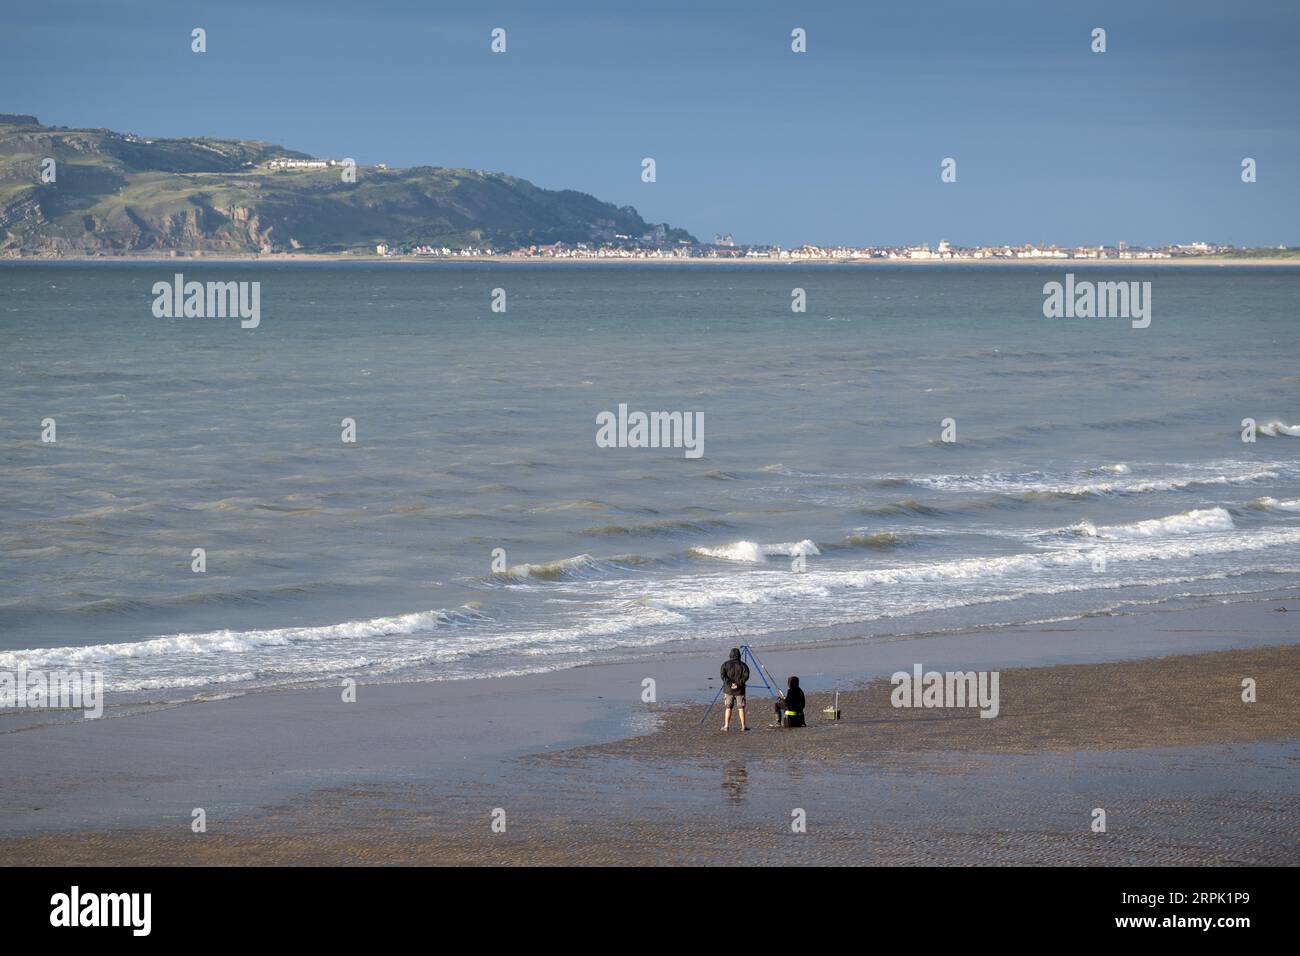 People fishing on the beach in North Wales, with Landudno and the Great Orme in the backgroup. Wales, UK. Stock Photo